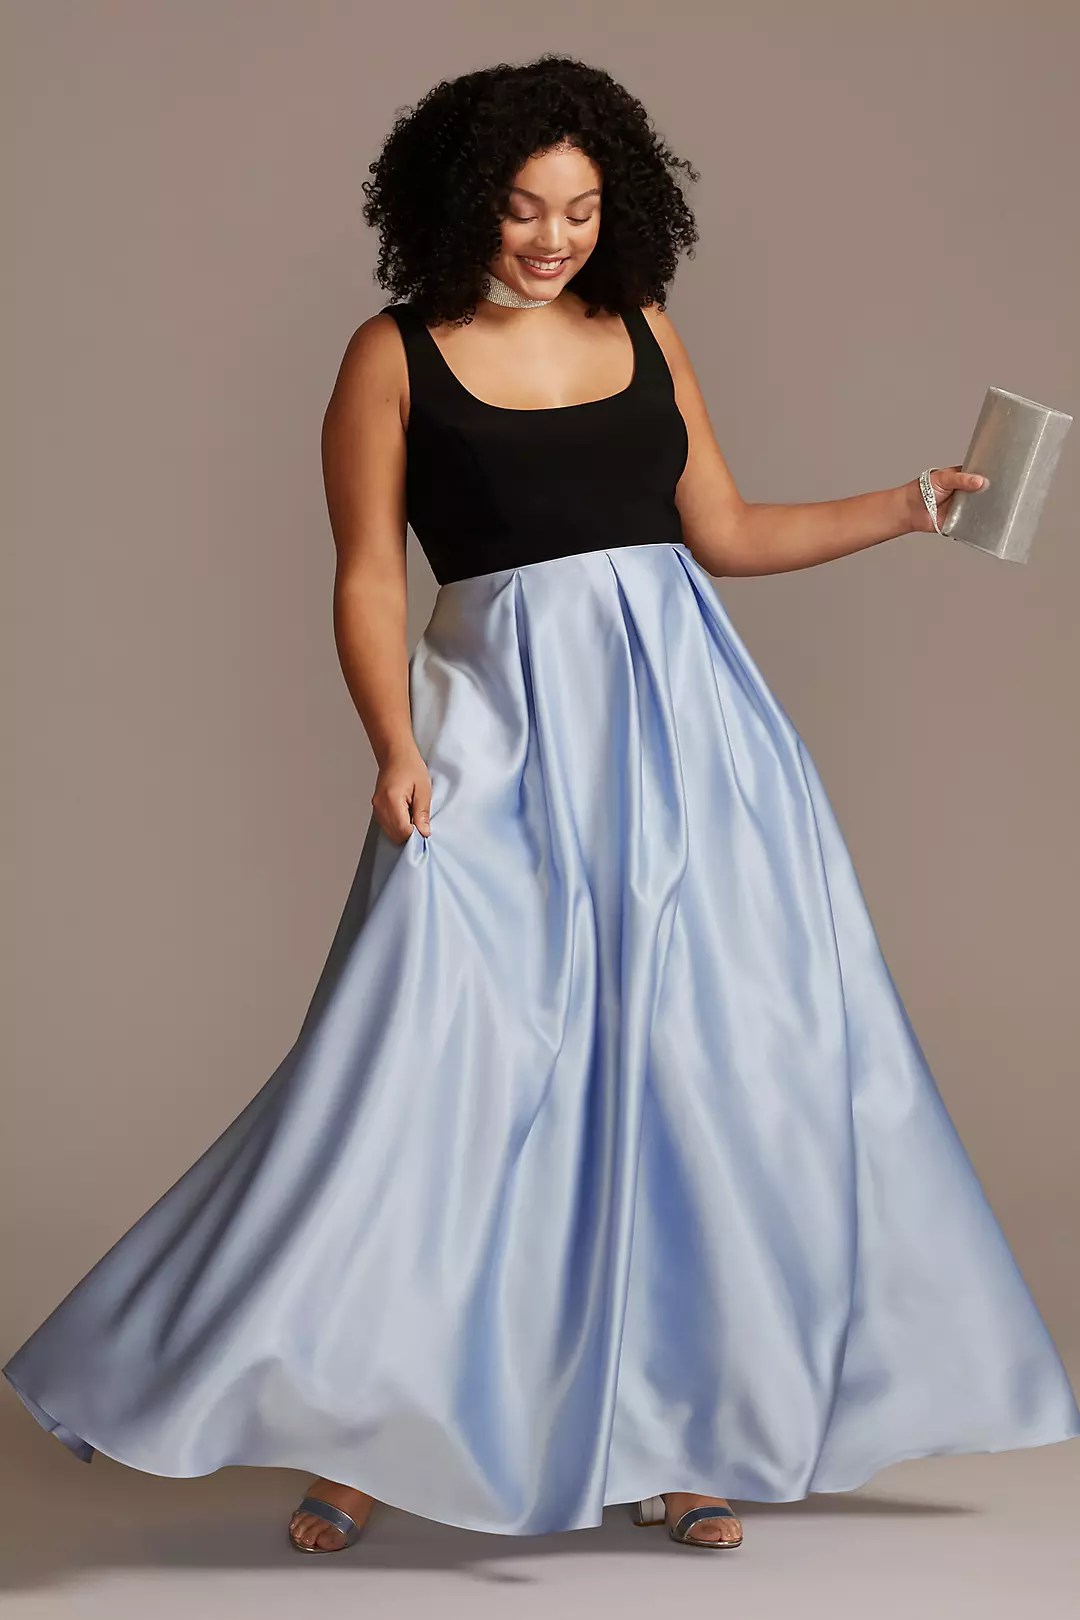 Satin Skirt Plus Size Gown with Illusion Sides Image